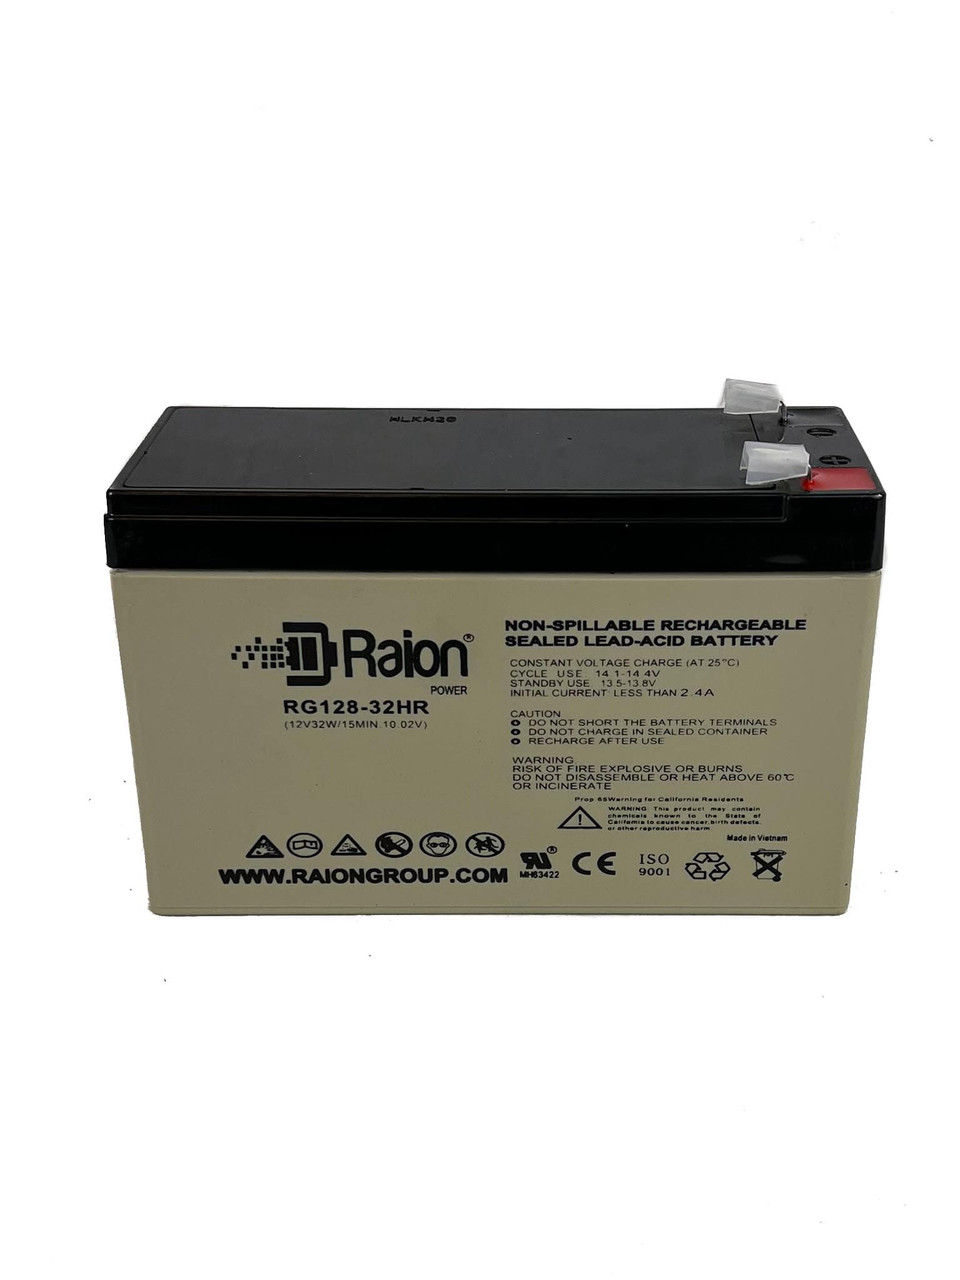 Raion Power RG128-32HR Replacement High Rate Battery Cartridge for Clary UPS1800VA1GSL